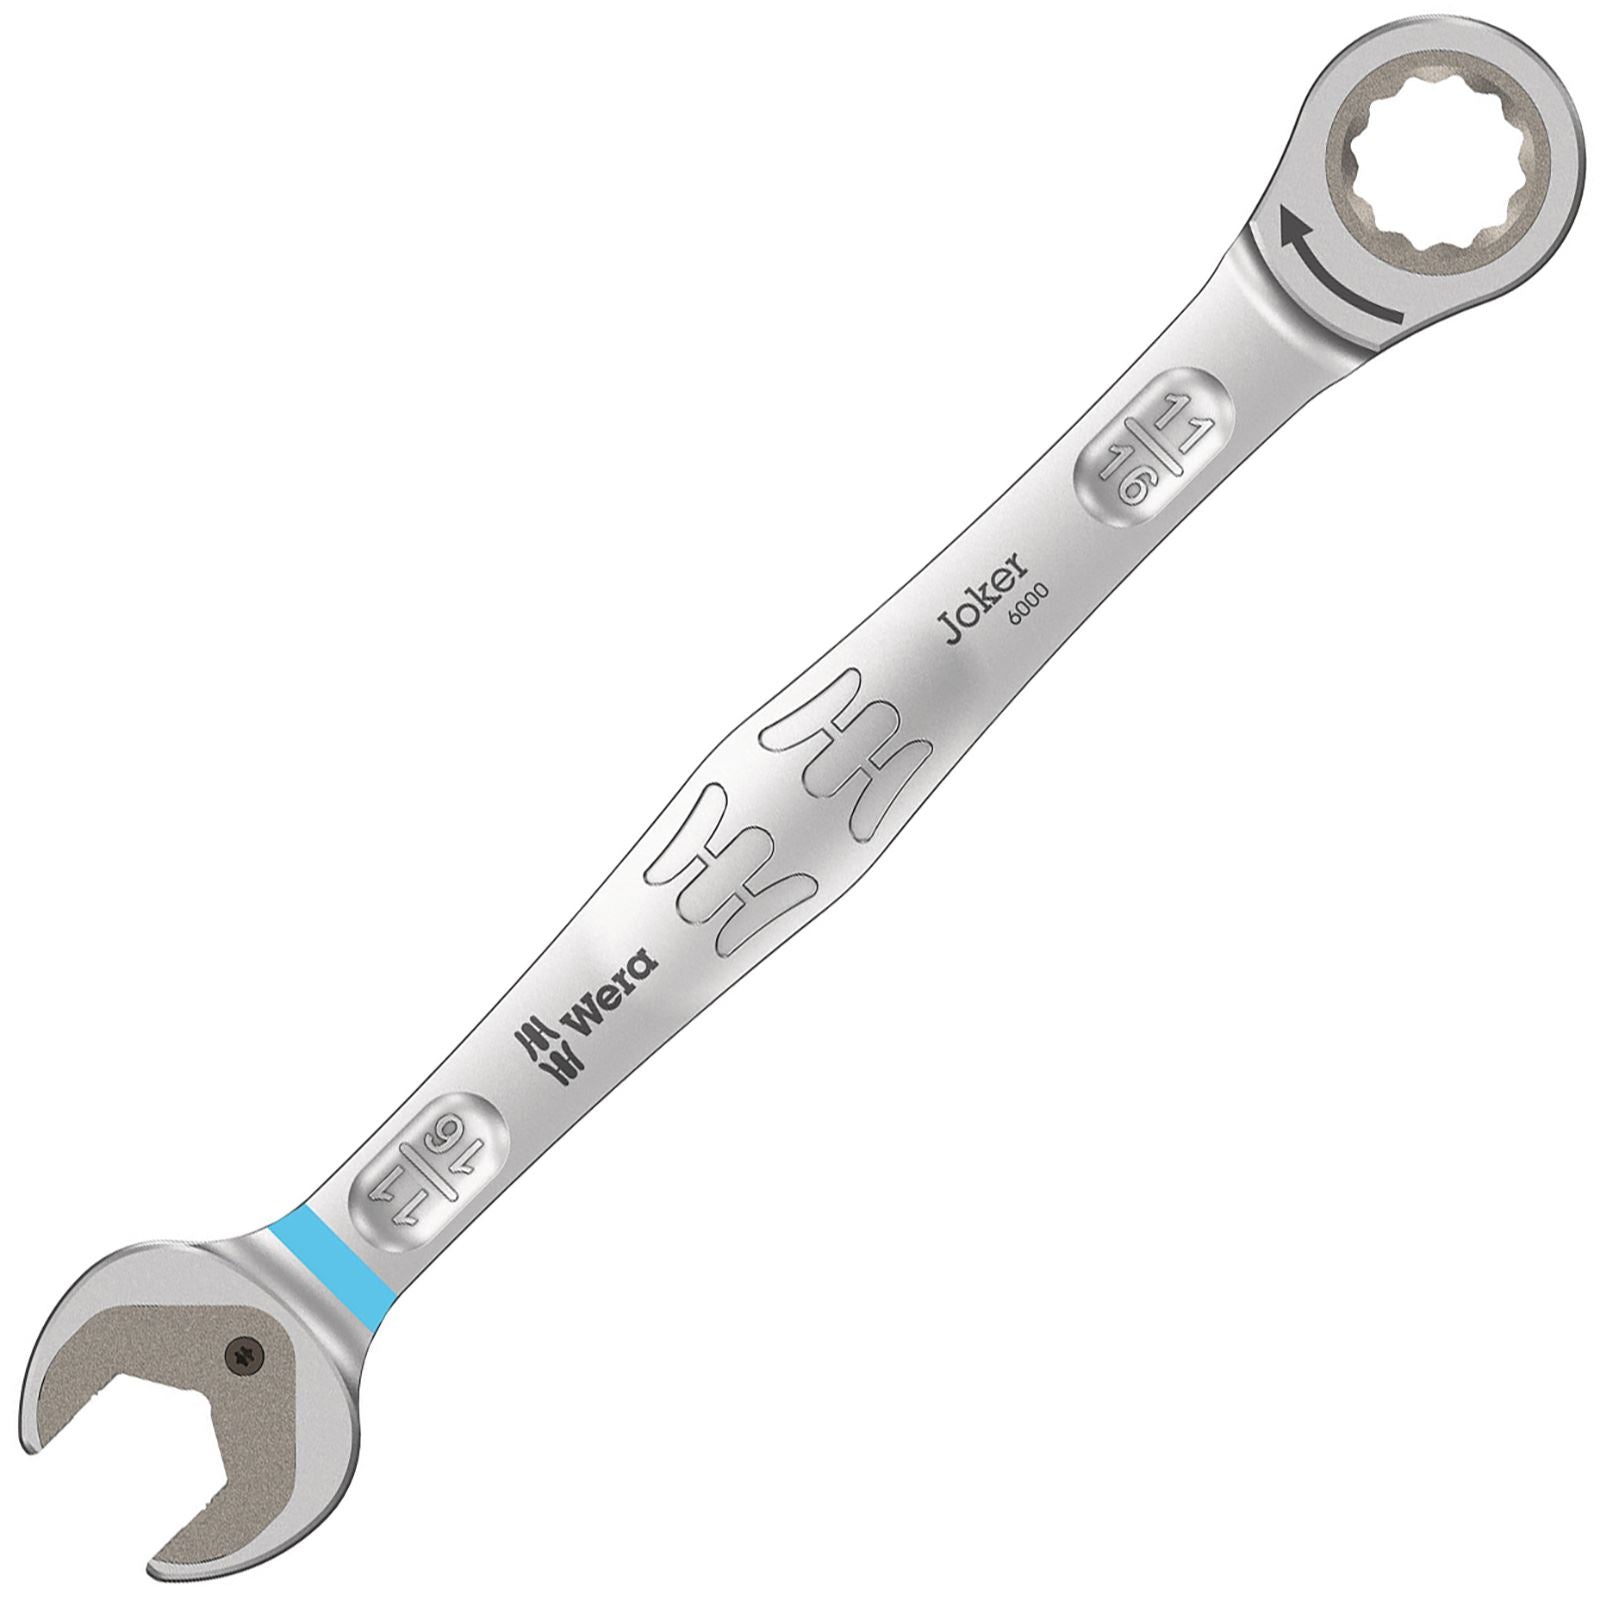 Wera Ratchet Combination Spanner Wrench 6000 Joker Metric Imperial Open End Ring Choose Size